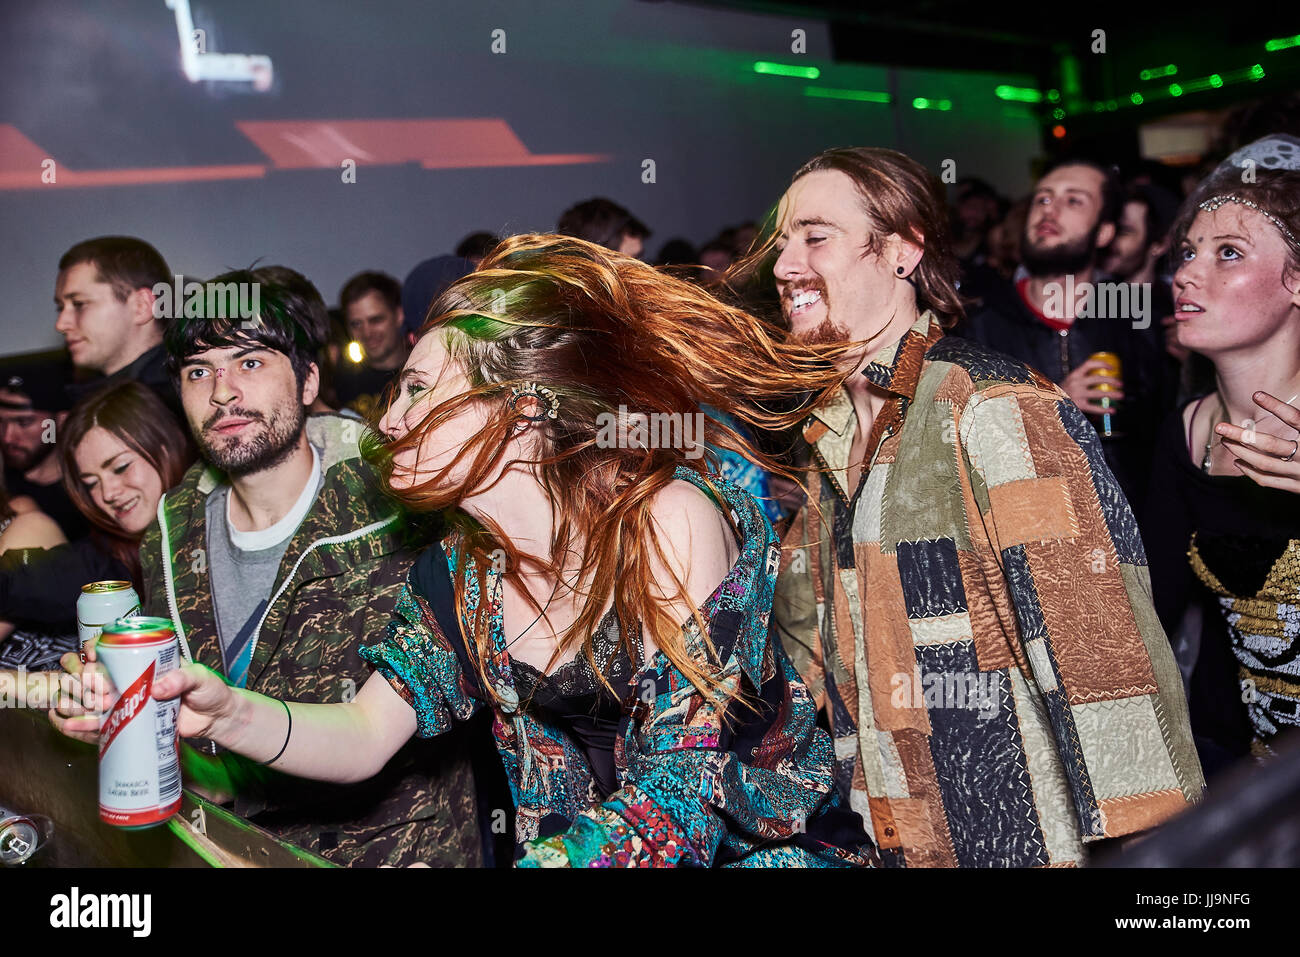 BRISTOL, UK - DECEMBER 2016: A young, attractive woman's hair partly covers her face as she dances in a crowd at a nightclub on December 4, 2016 Stock Photo